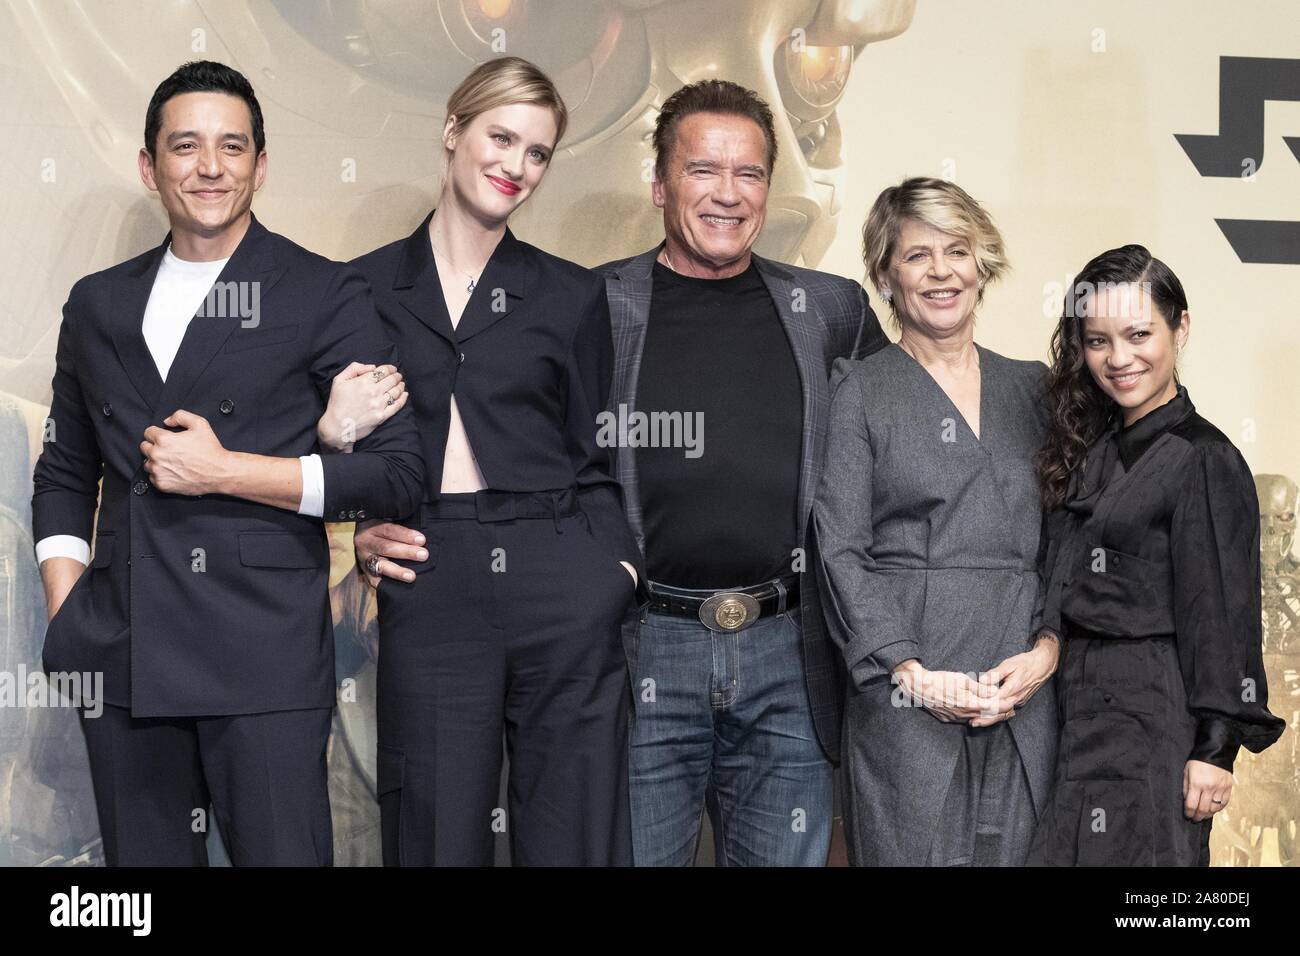 November 5, 2019, Tokyo, Japan: (L to R) American-Mexican actor Gabriel Luna, Canadian actress Mackenzie Davis, Austrian-American actor Arnold Schwarzenegger, American actress Linda Hamilton and Colombian actress Natalia Reyes pose for the cameras during a news conference for the movie Terminator: Dark Fate at Bellesalle Roppongi in Tokyo. The film will be released in Japan on November 8. (Credit Image: © Rodrigo Reyes Marin/ZUMA Wire) Stock Photo